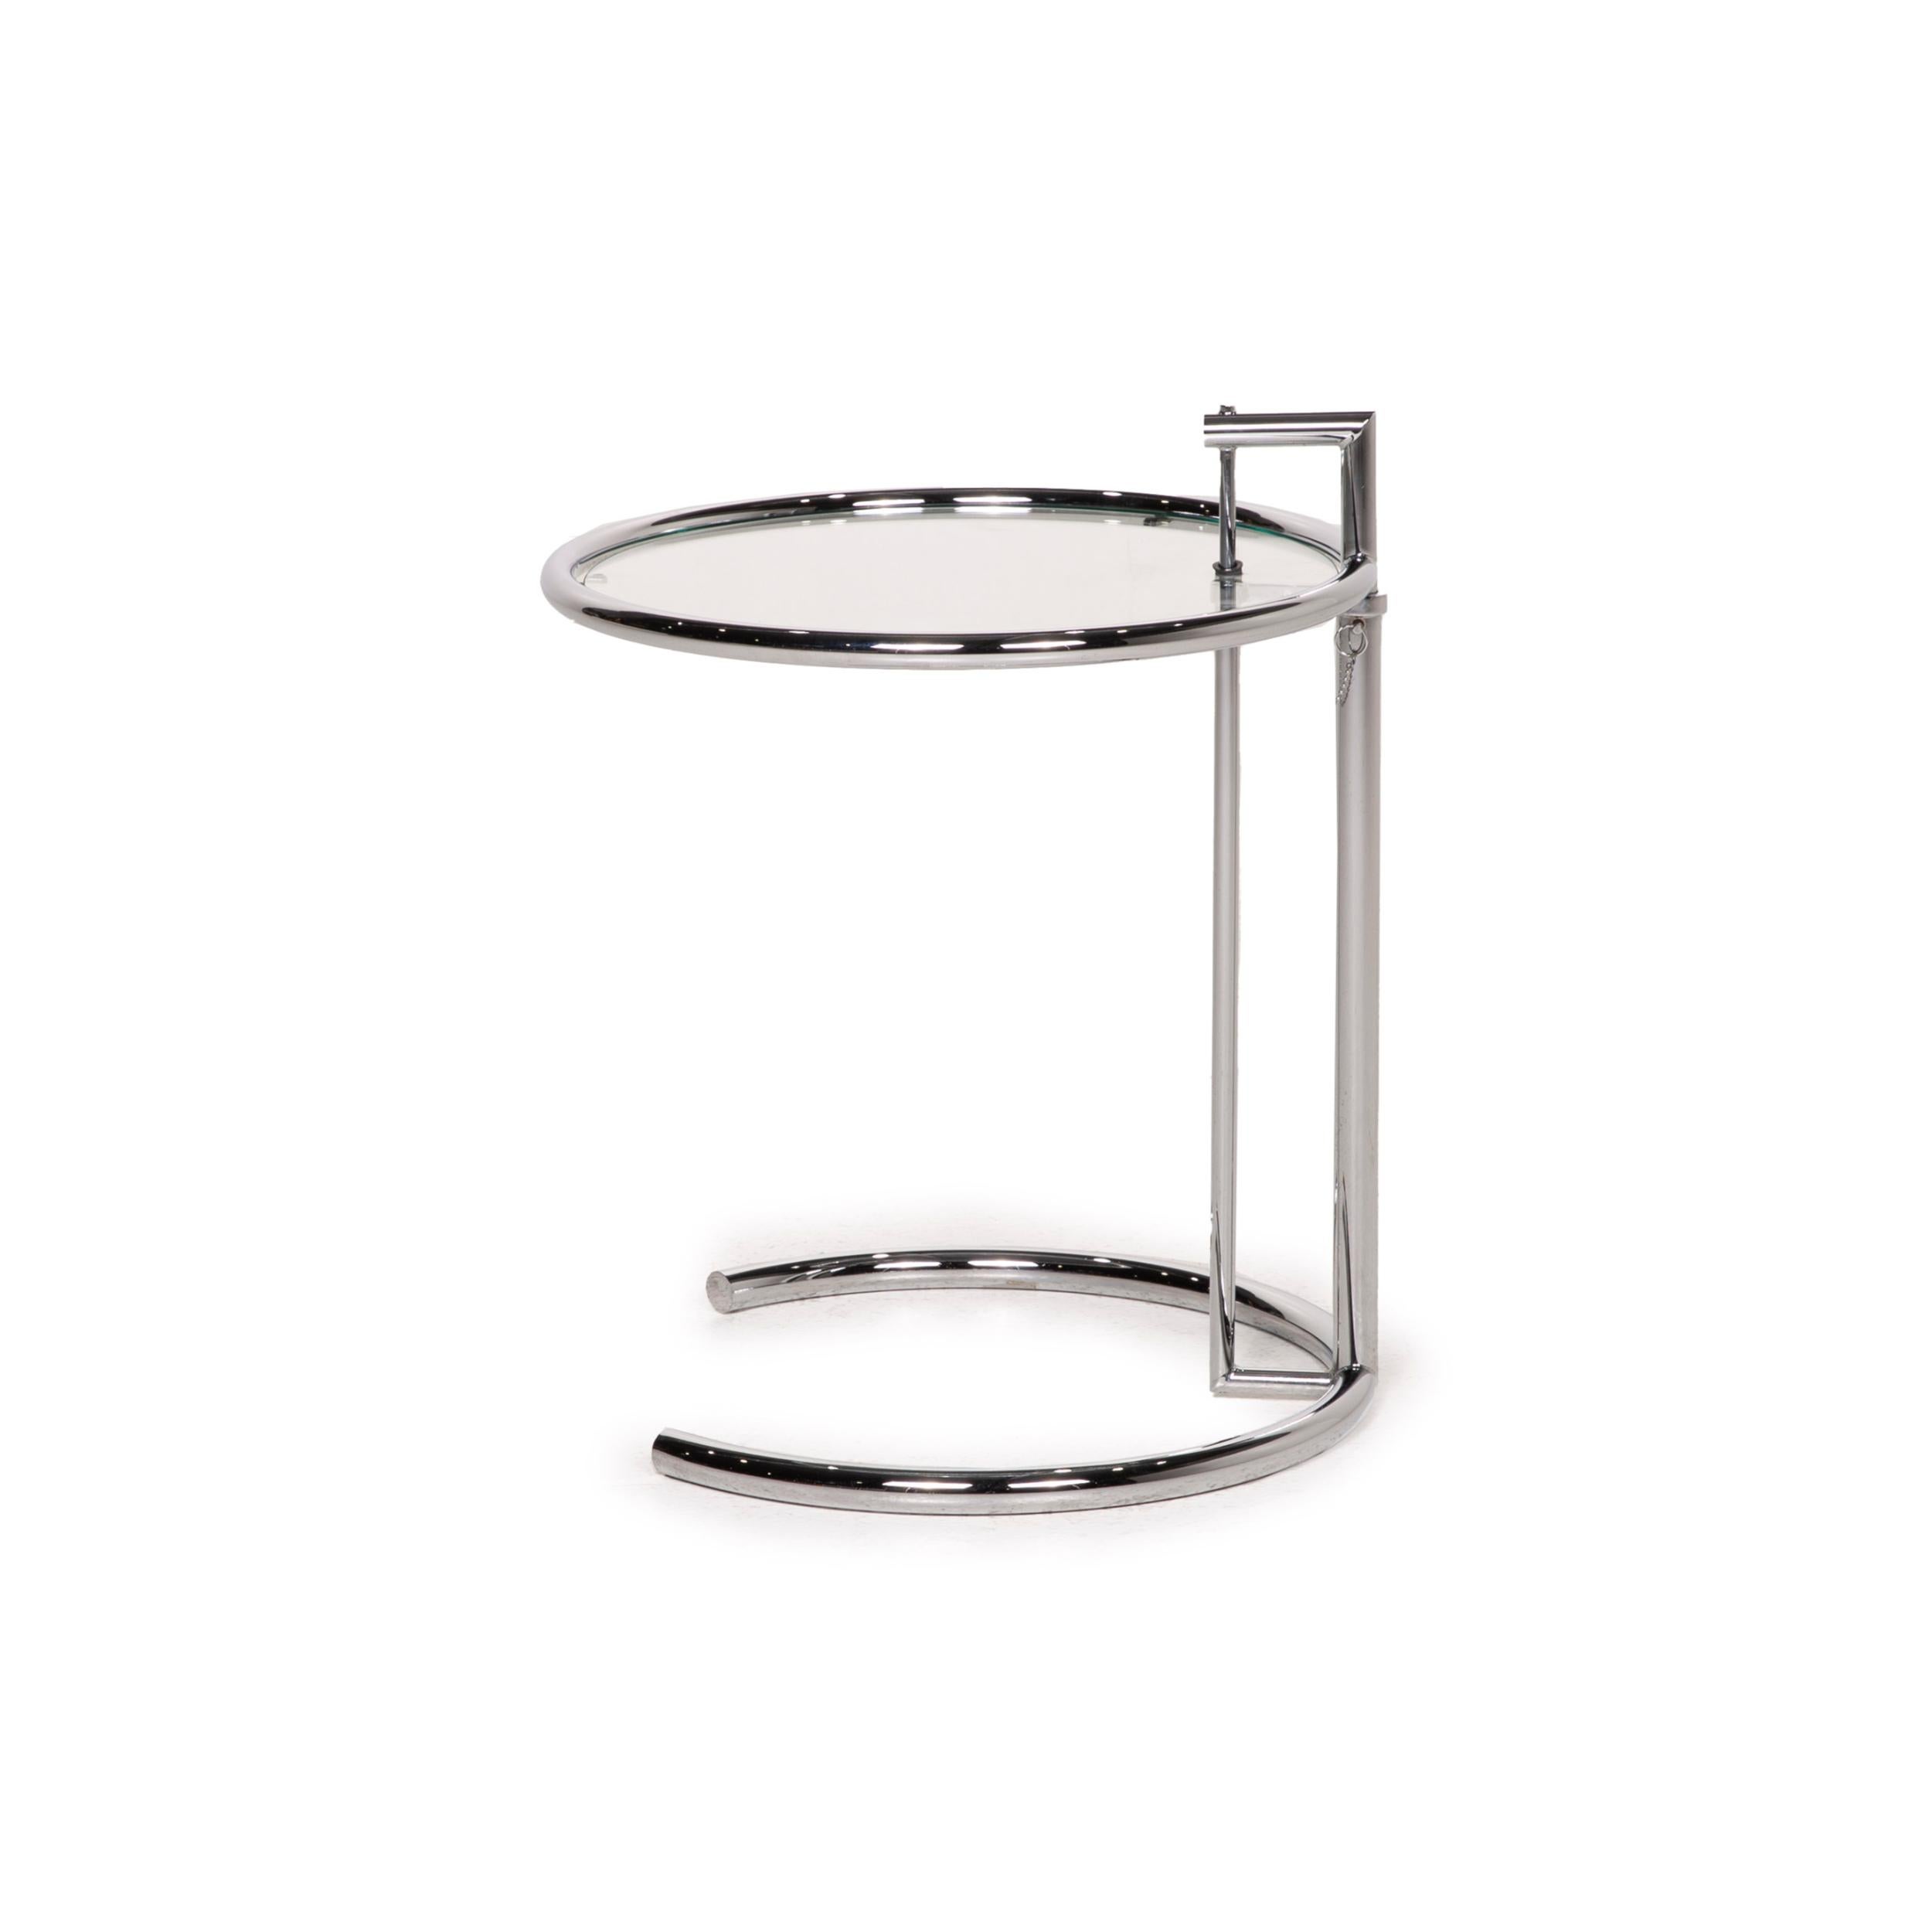 ClassiCon Adjustable Table E1027 Glass Table Side Table Chrome by Eileen Gray 1